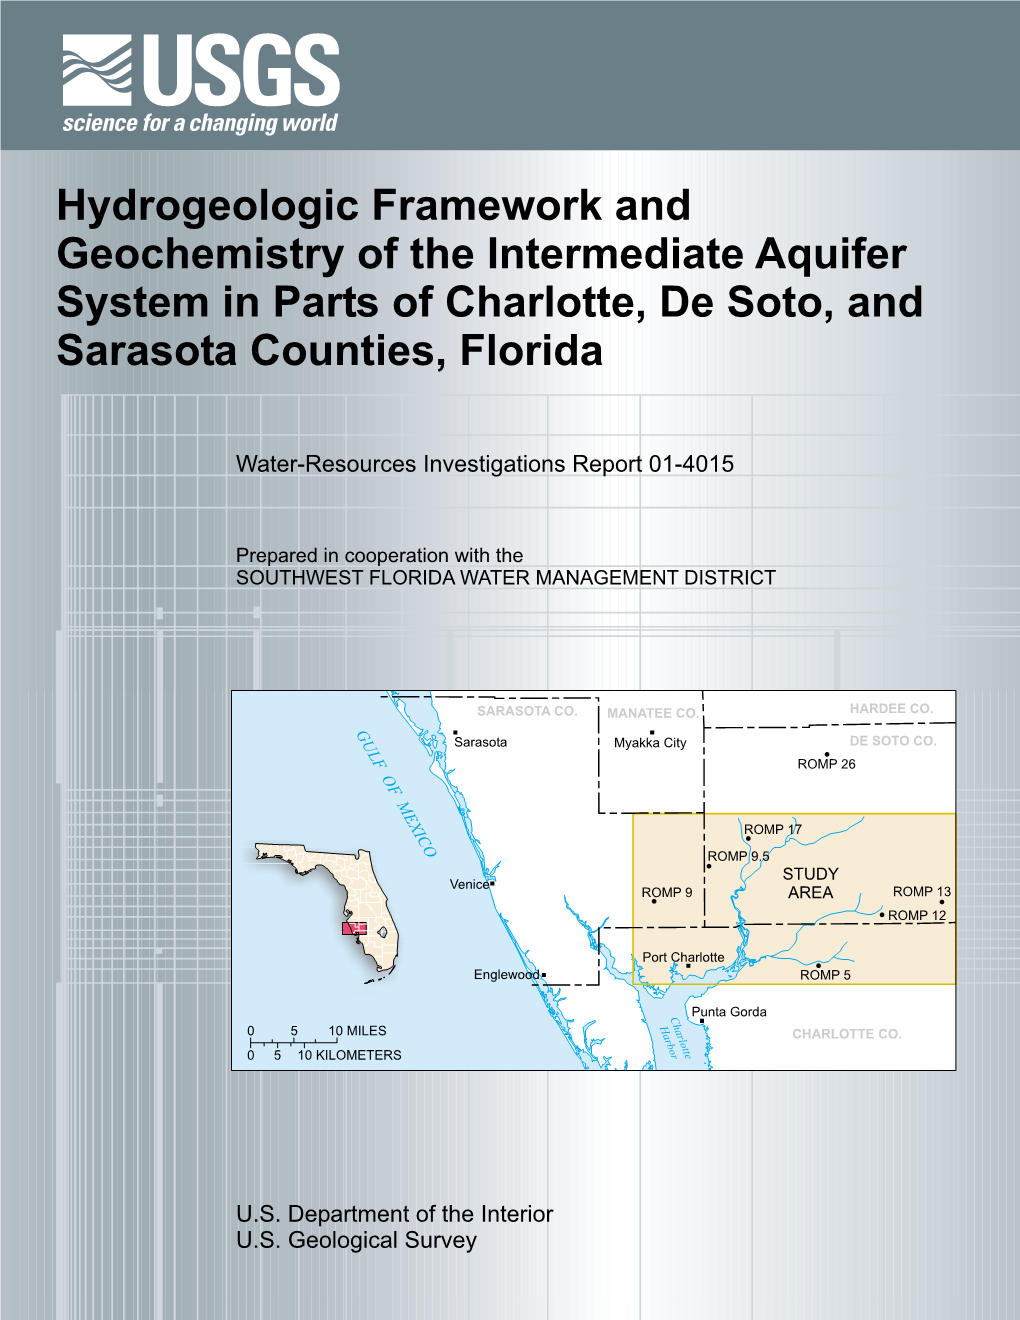 Hydrogeologic Framework and Geochemistry of the Intermediate Aquifer System in Parts of Charlotte, De Soto, and Sarasota Counties, Florida